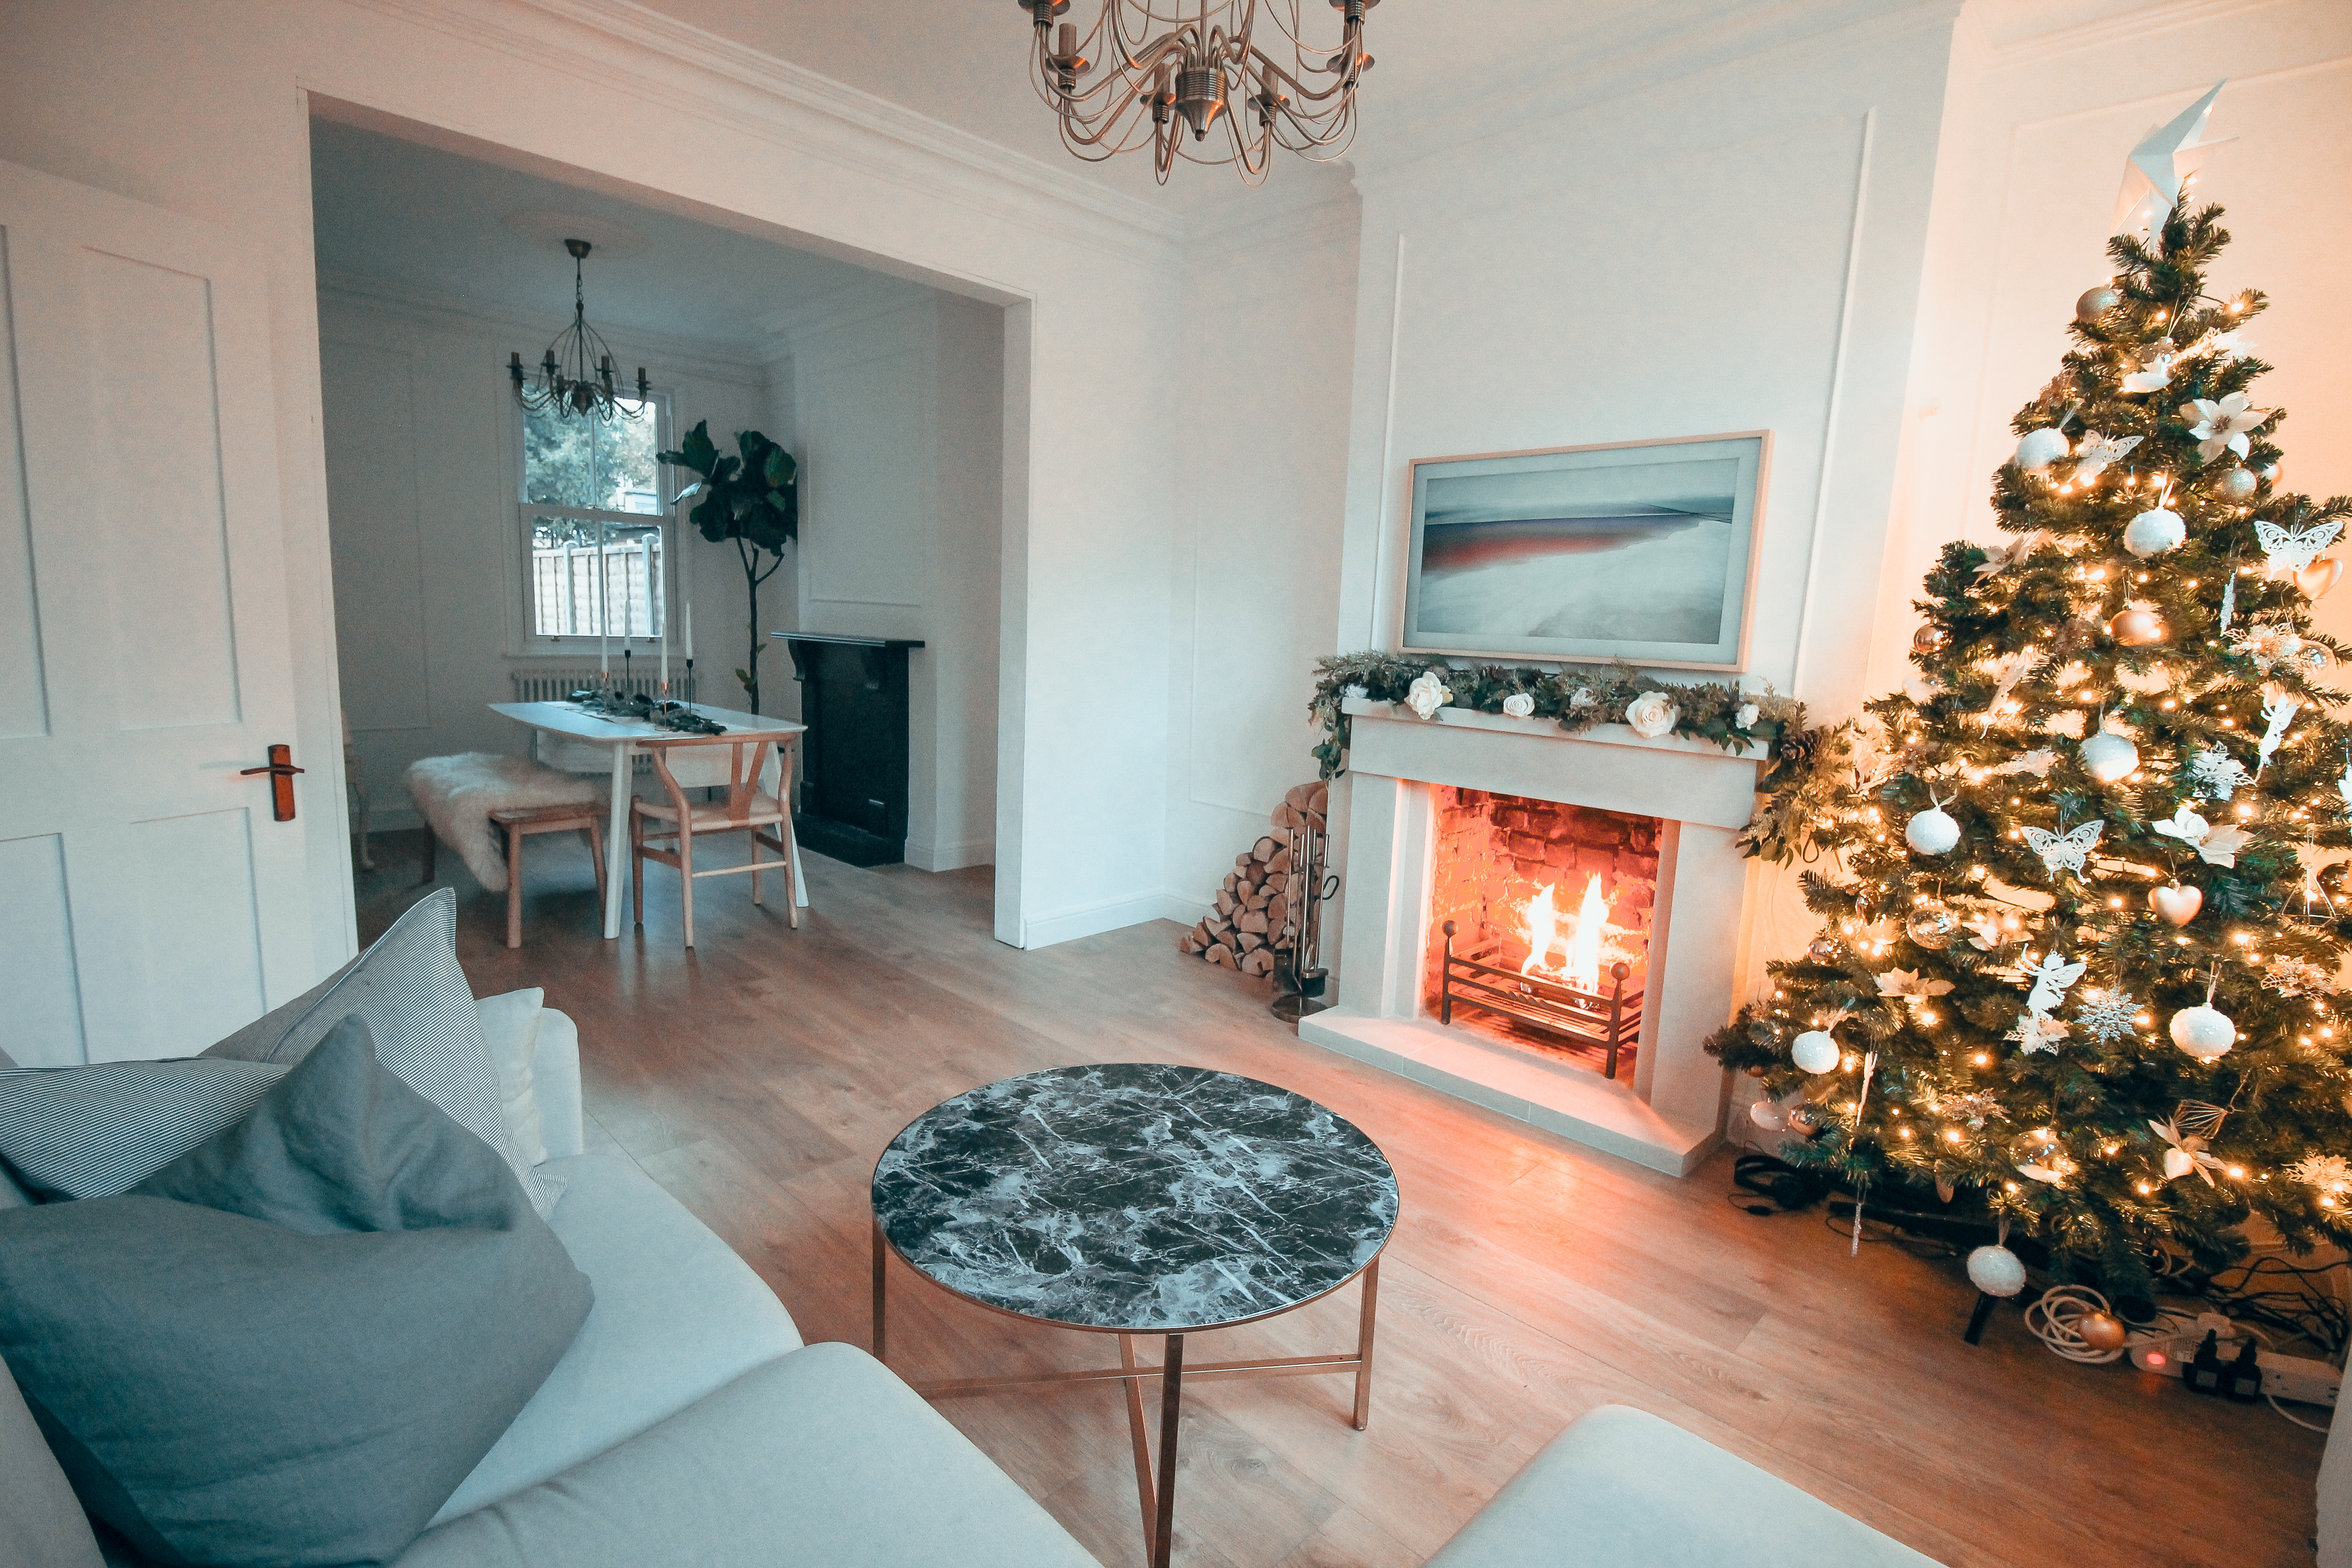 Decorating our Victorian Terrace Home for Christmas! - Kima Otung